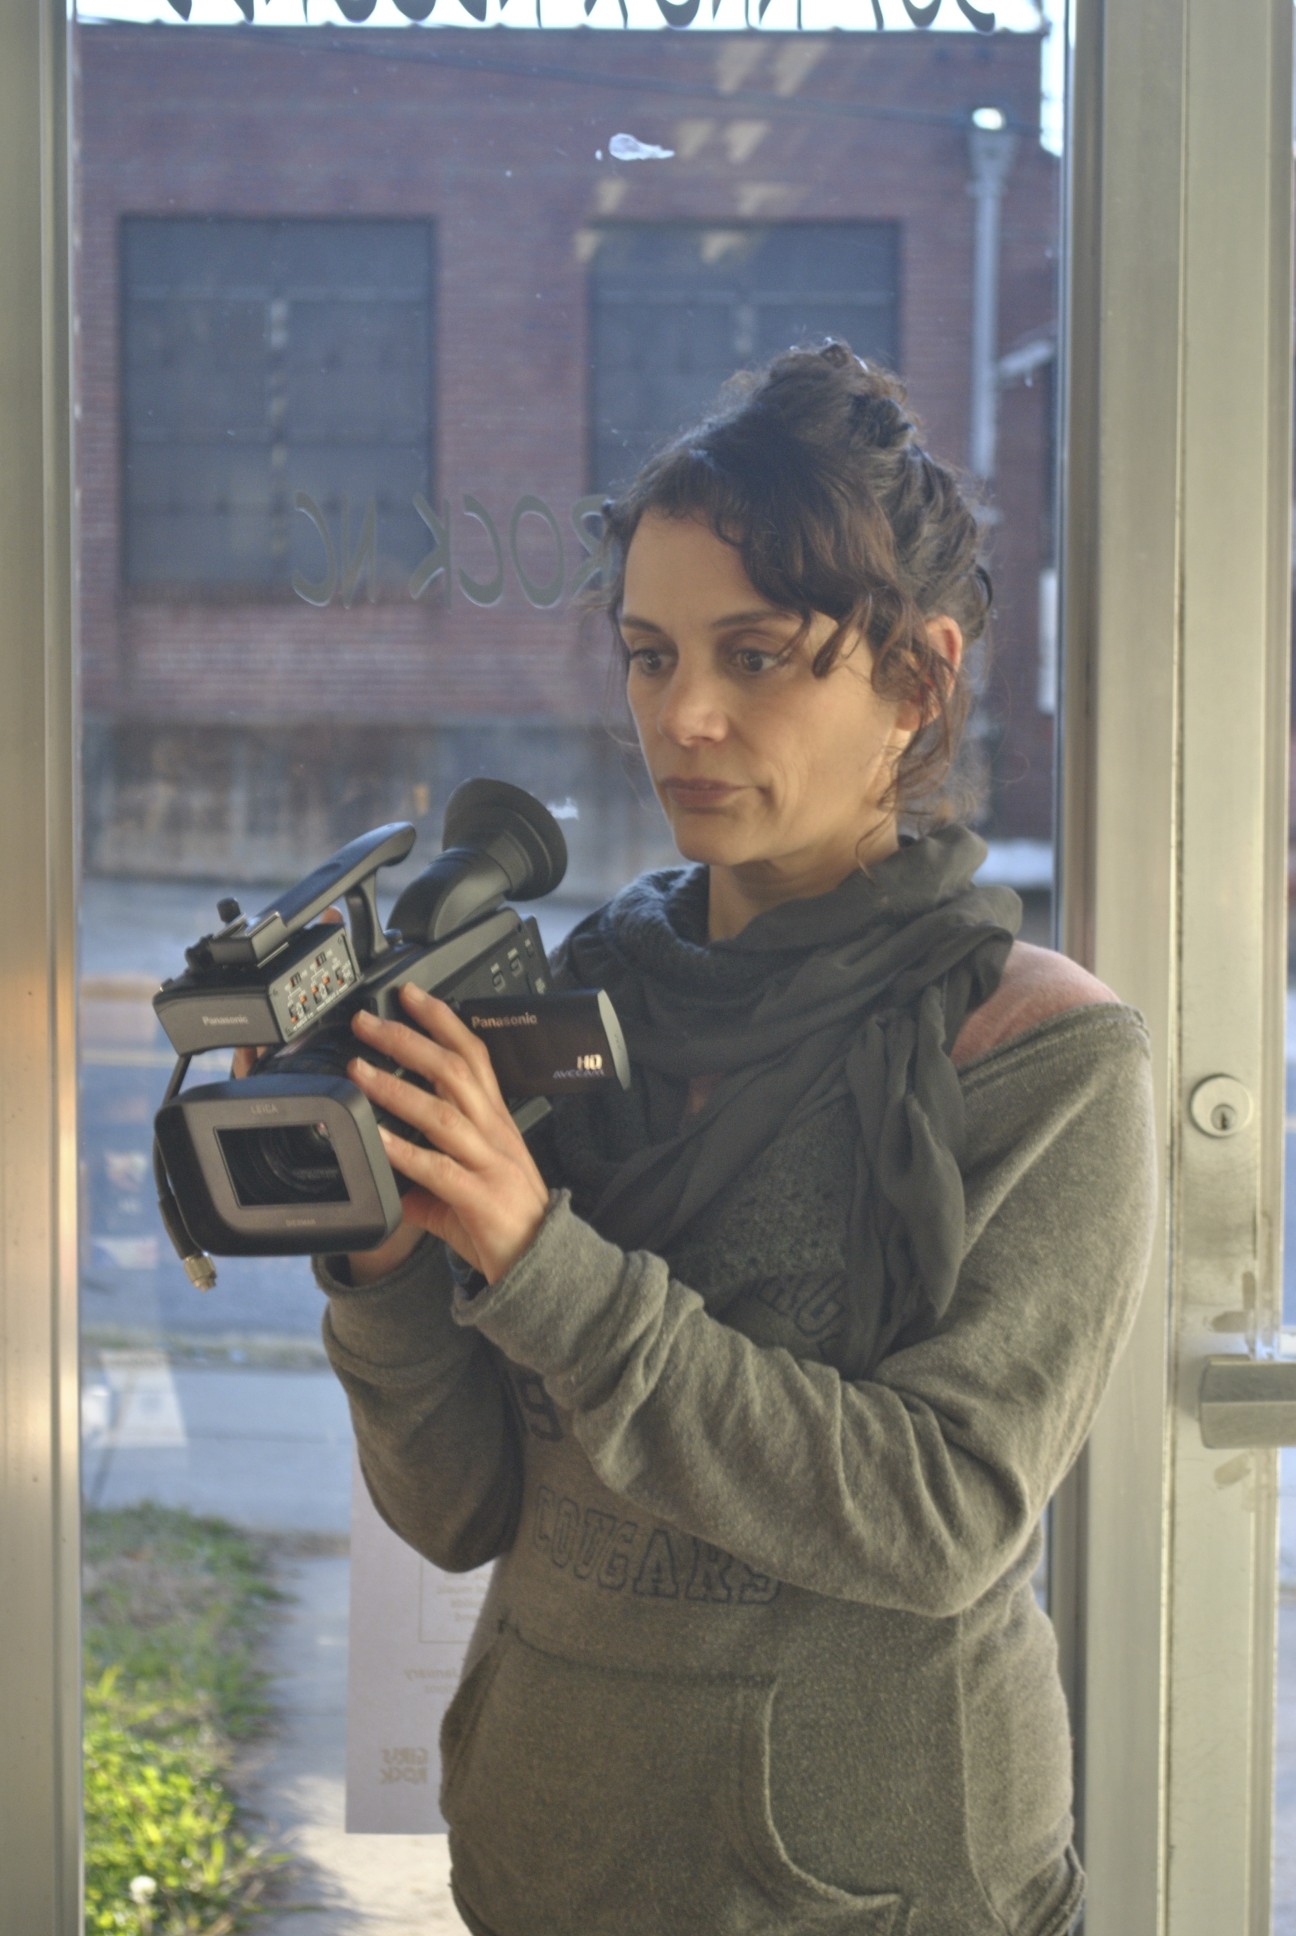 A woman uses a handheld video camera and looks into the viewfinder